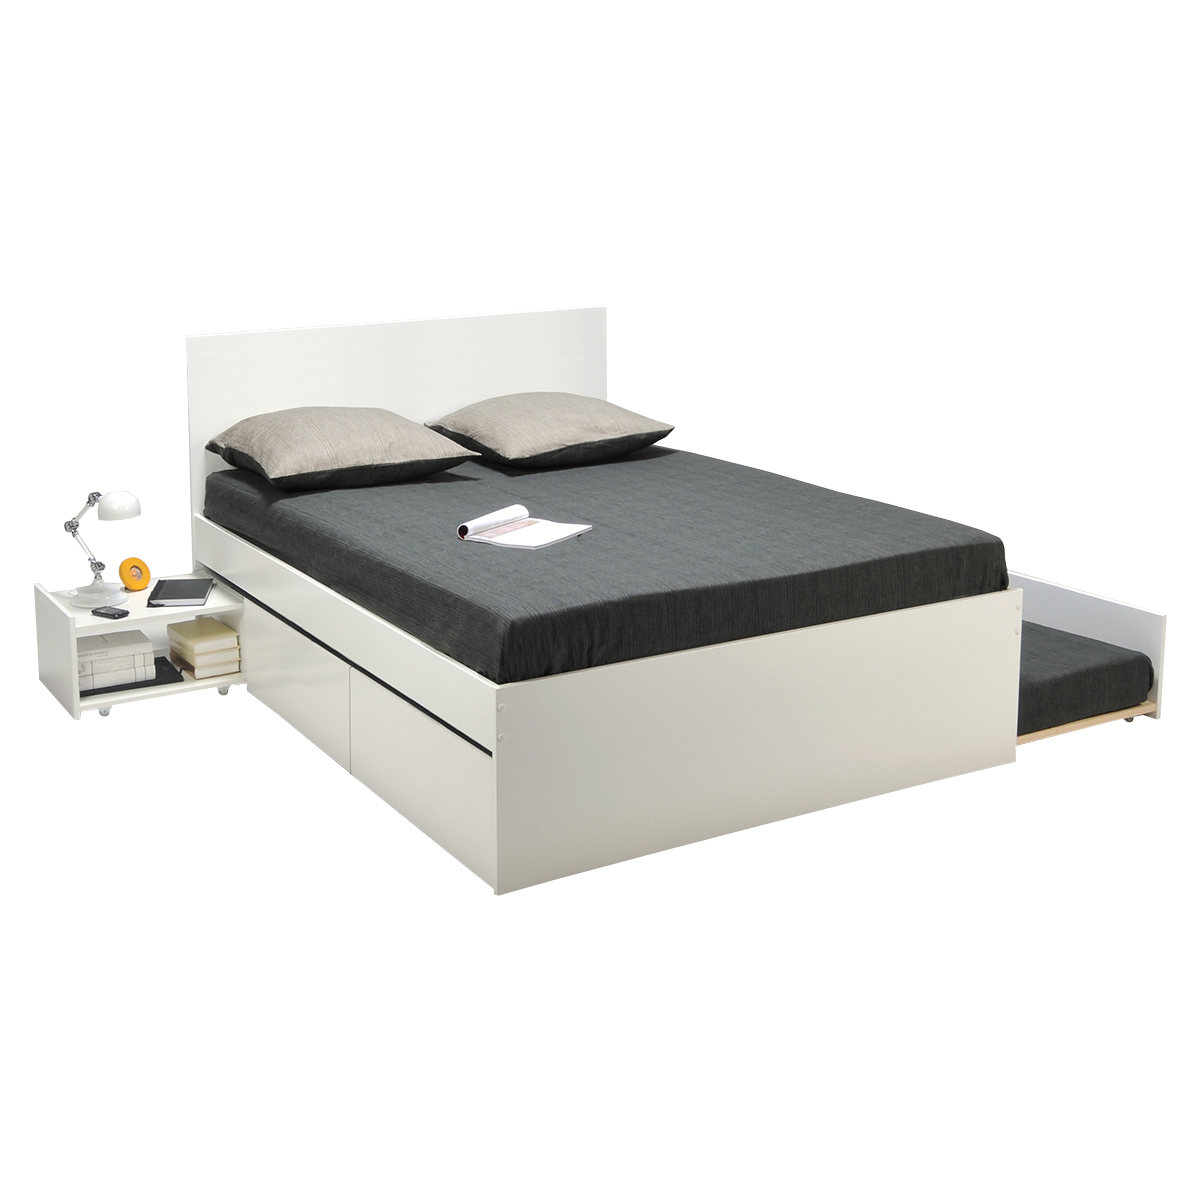 Matelas gonflable 140x190 - Cdiscount